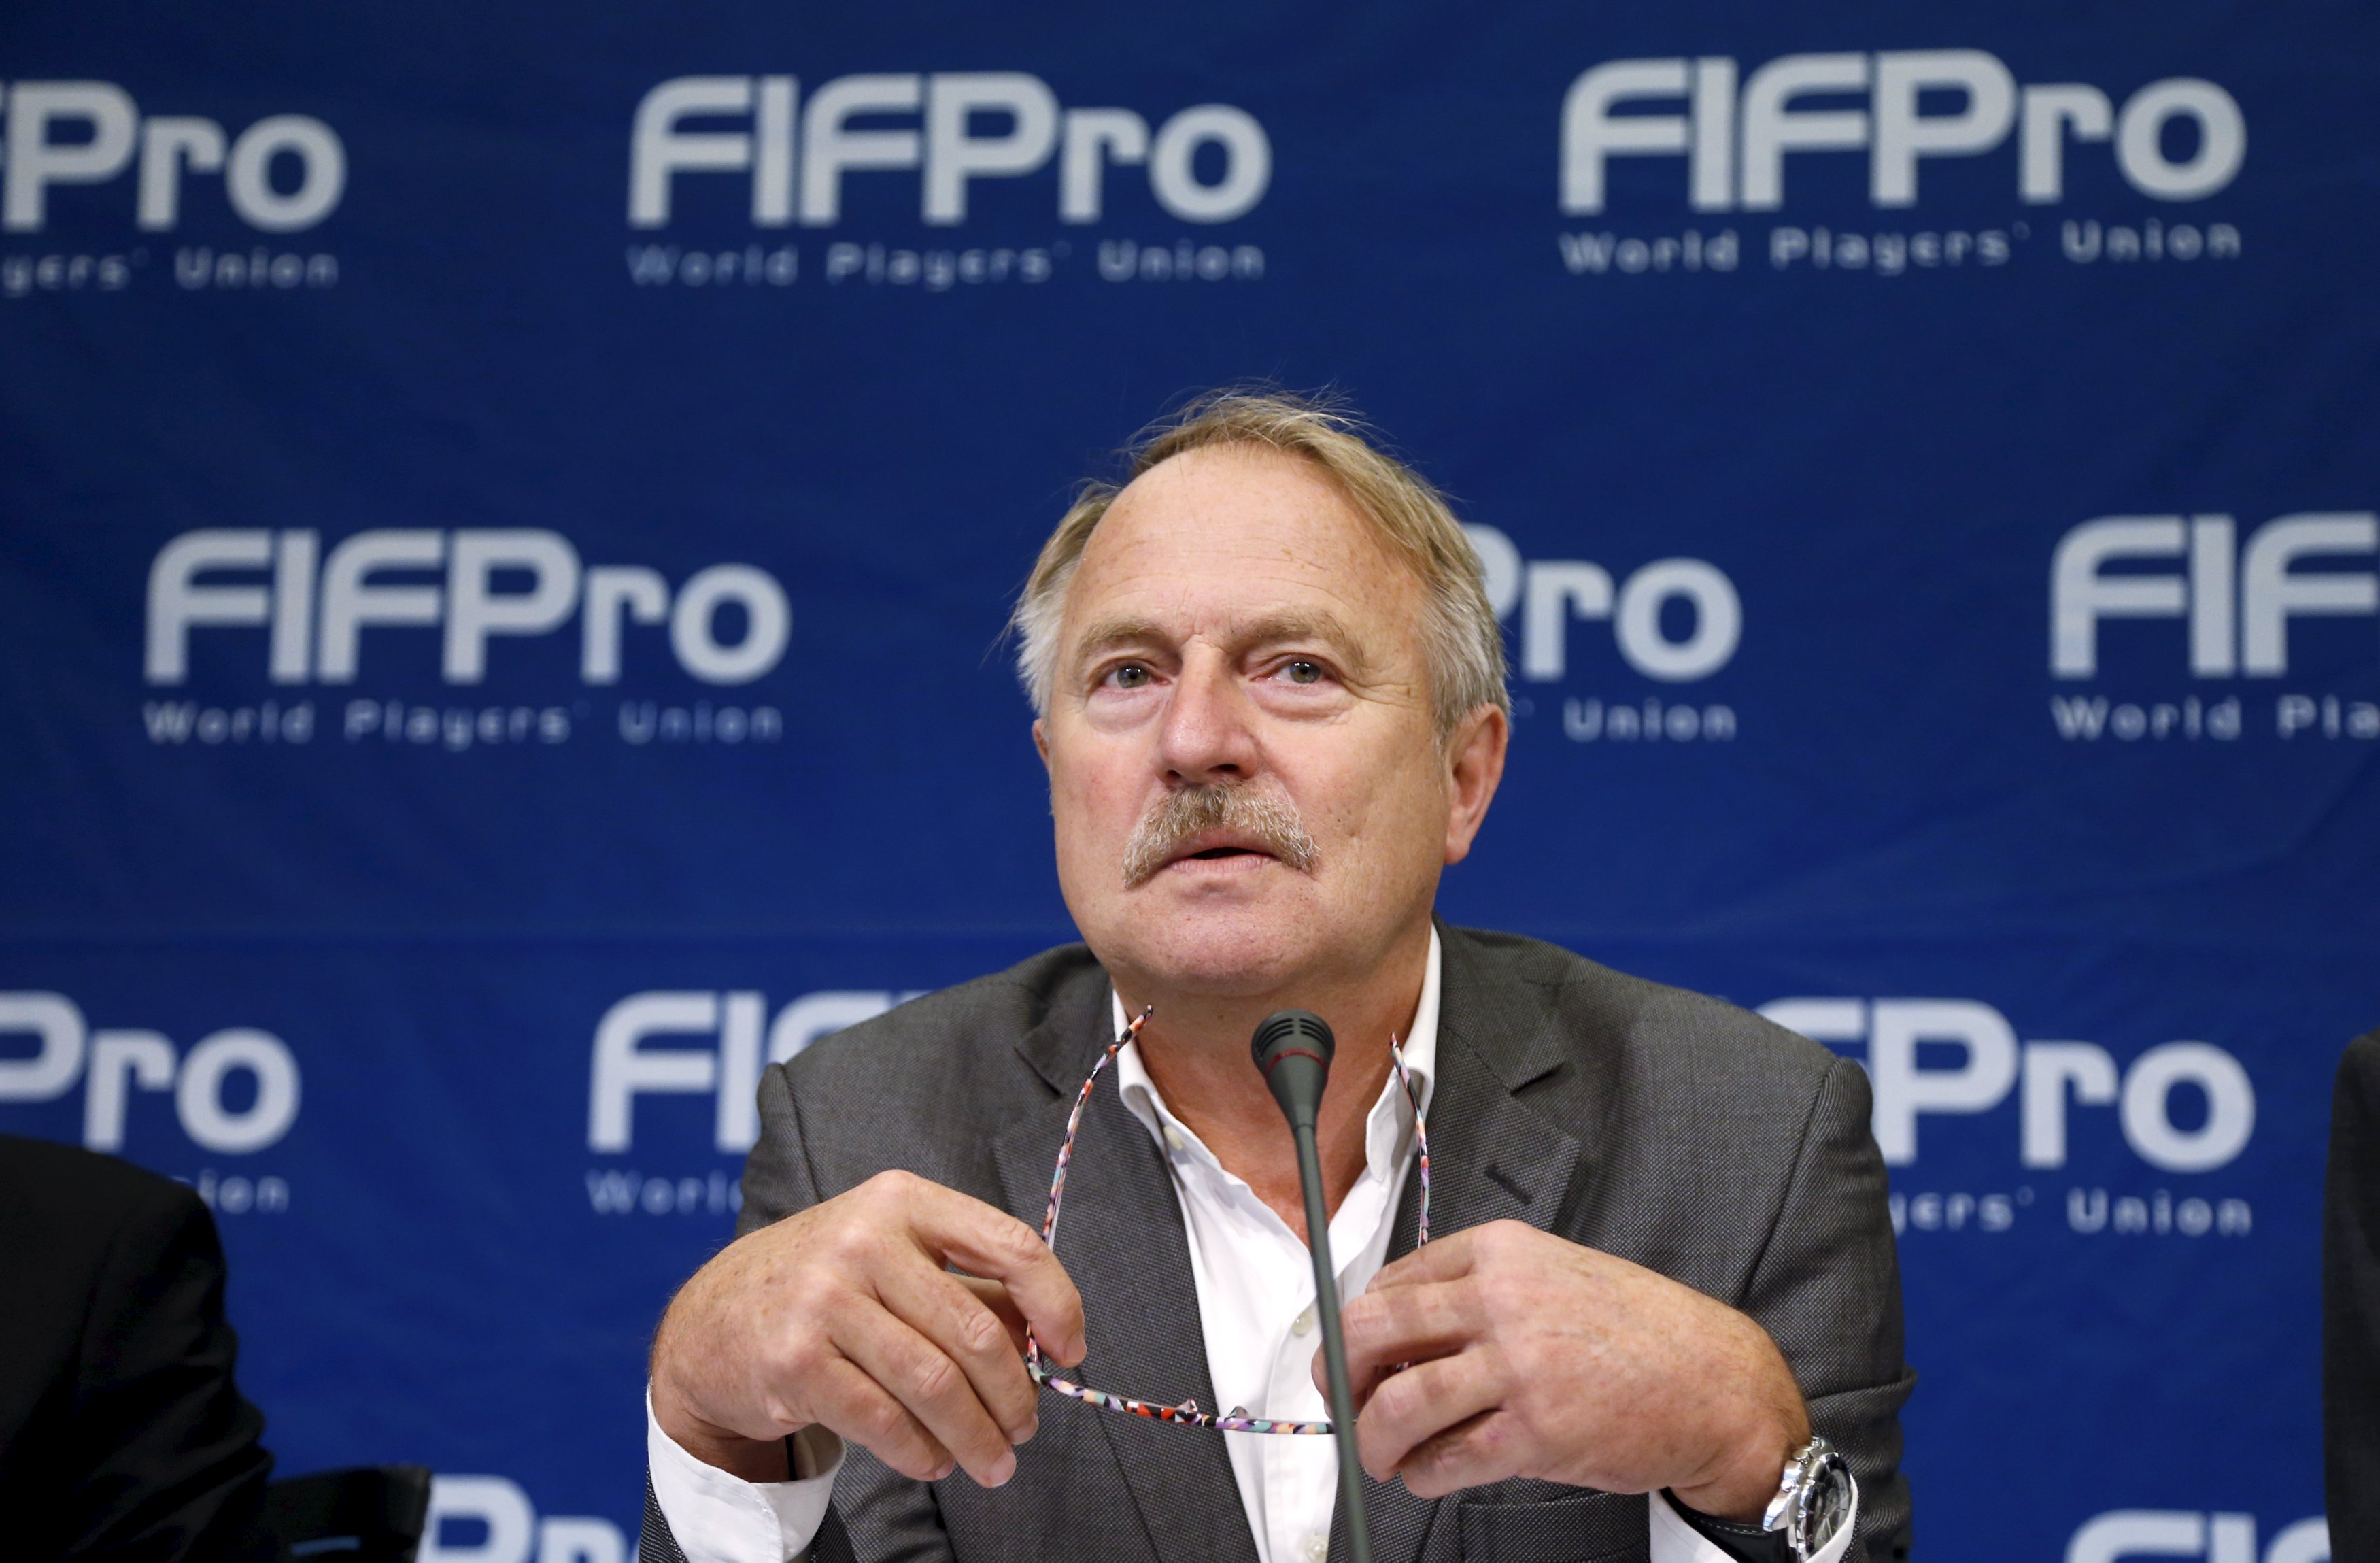 Theo van Seggelen, Secretary General of FIFPro, the world soccer players' union, addresses a news conference in Brussels, Belgium, September 18, 2015. The world players' union FIFPro said it had launched the biggest challenge to the transfer system since the 1995 Bosman ruling after it lodged a complaint at the European Commission on Friday. In a legal action directed against soccer's governing body FIFA, the union claimed that the current transfer system was anti-competitive, unjustified and illegal.   REUTERS/Francois Lenoir